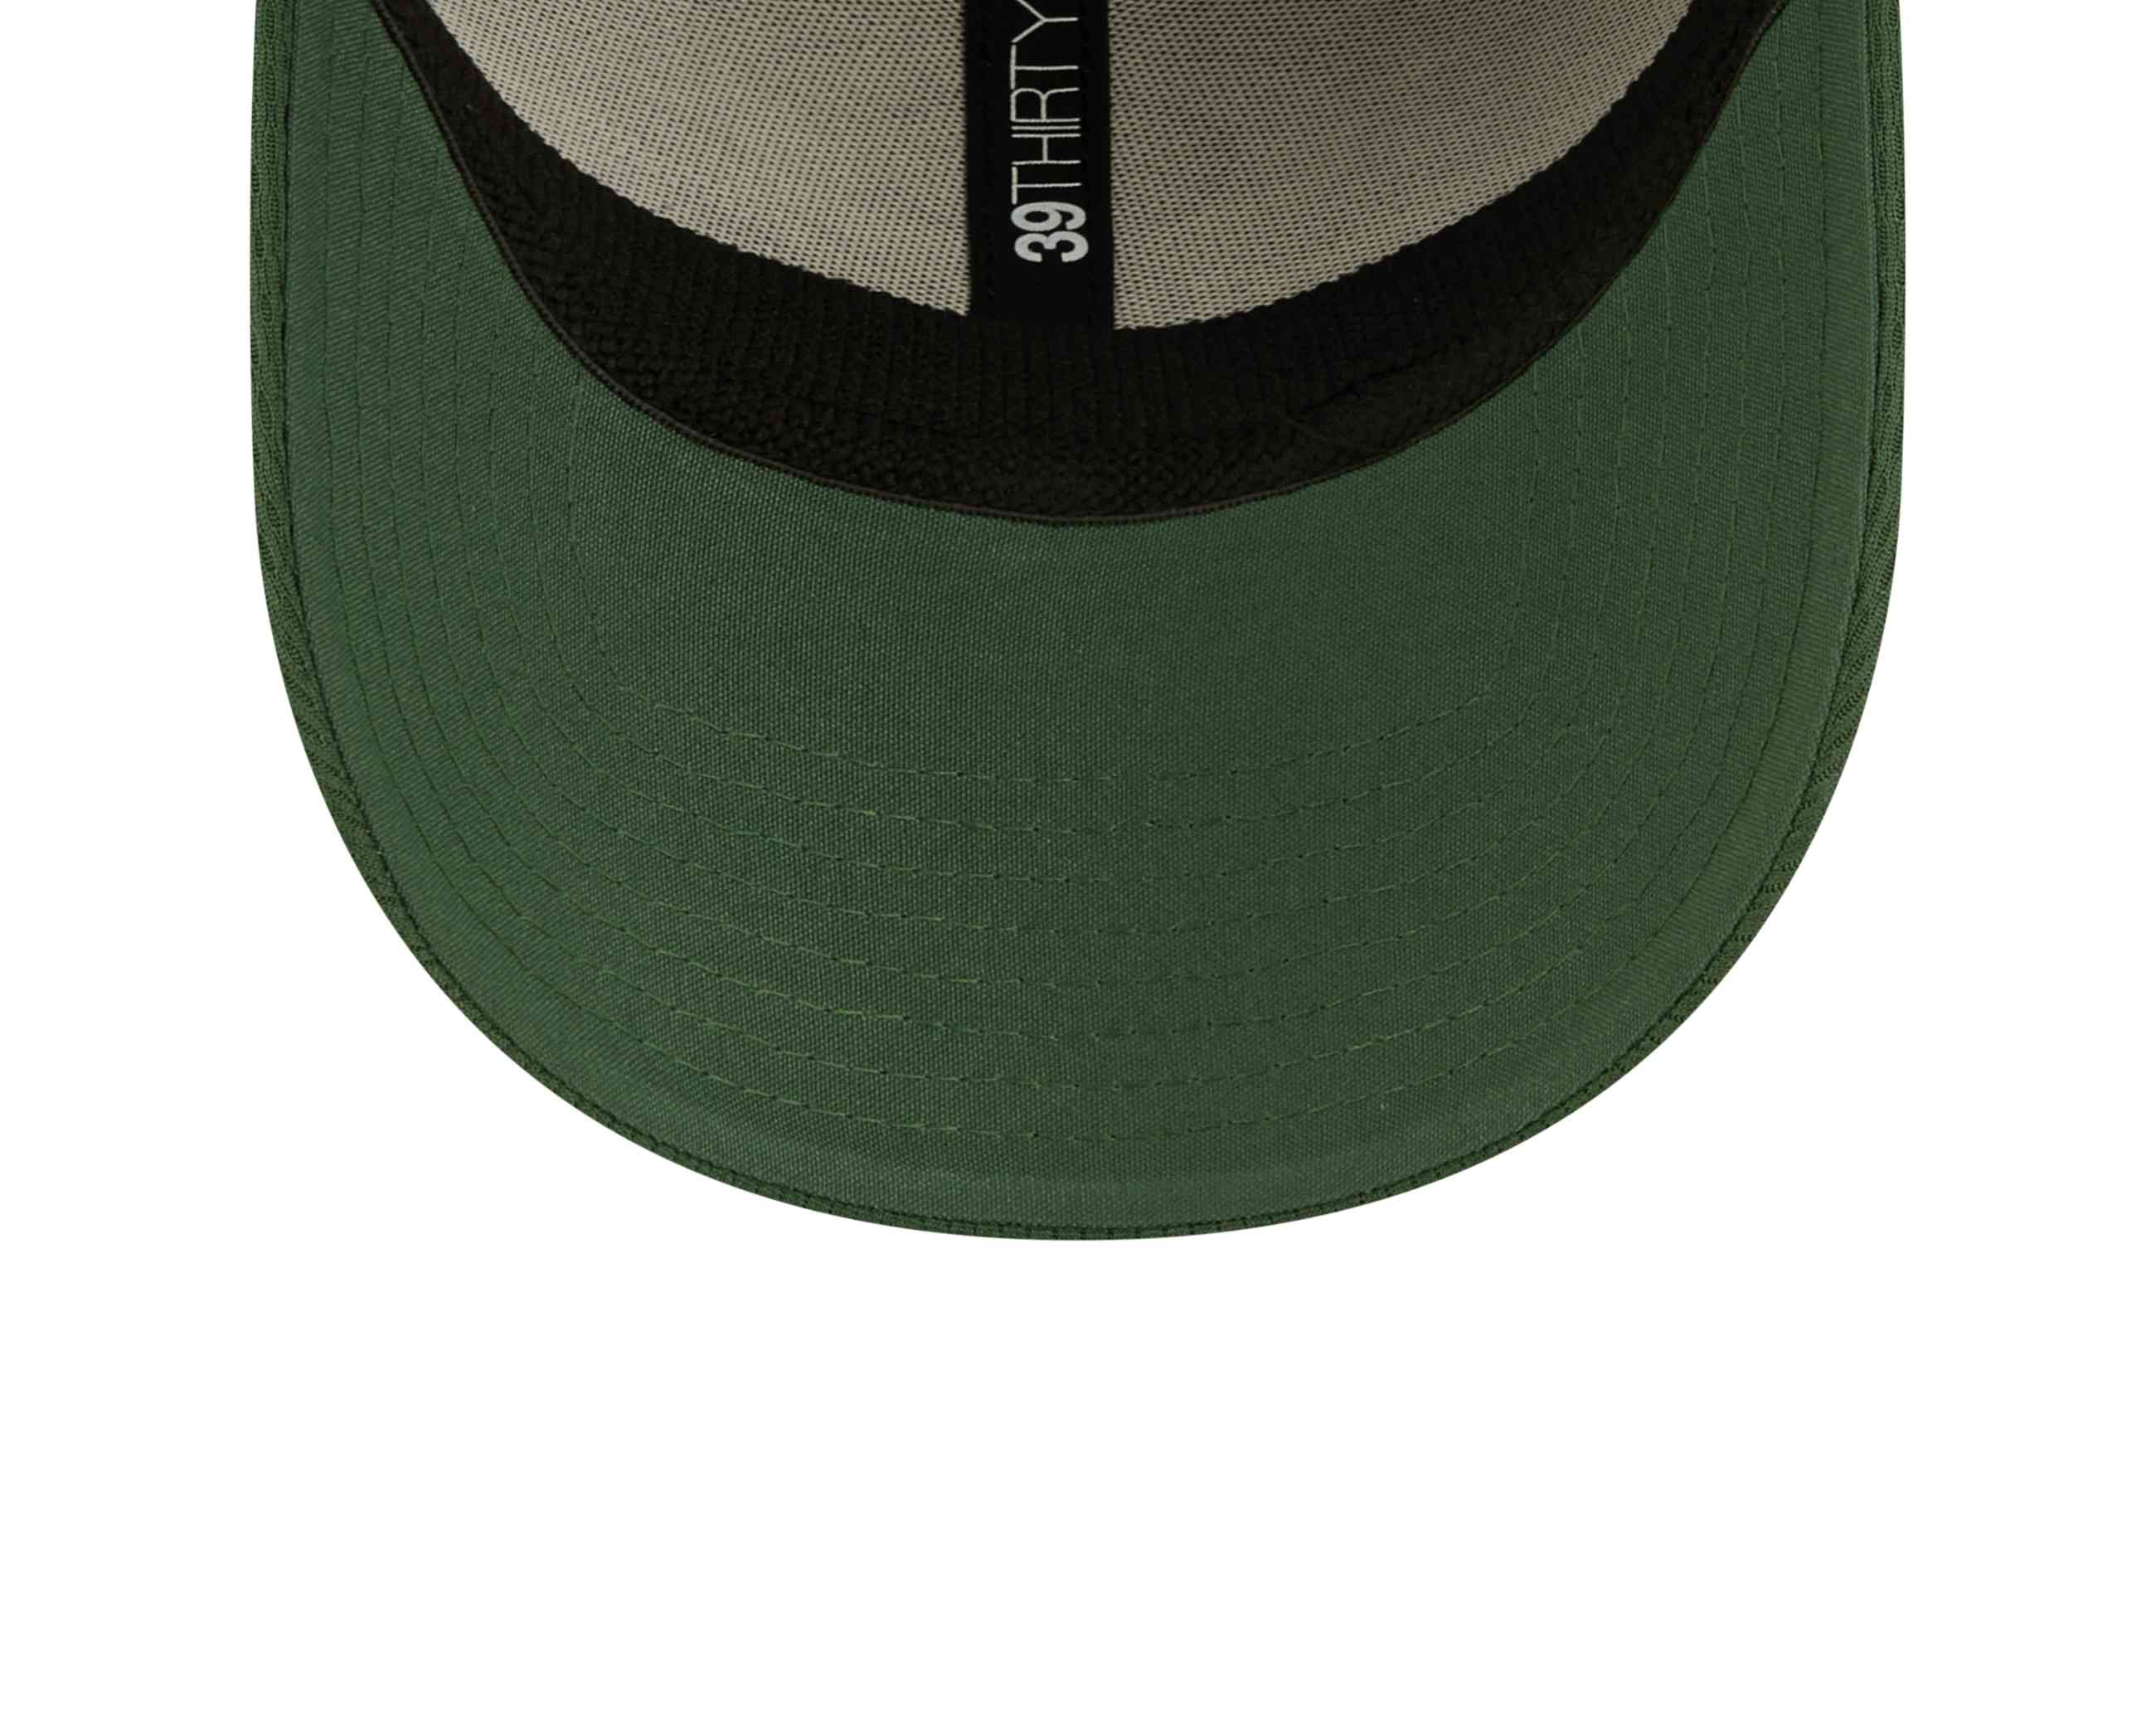 New Era - NFL Green Bay Packers 2022 Sideline Coach 39Thirty Stretch Cap